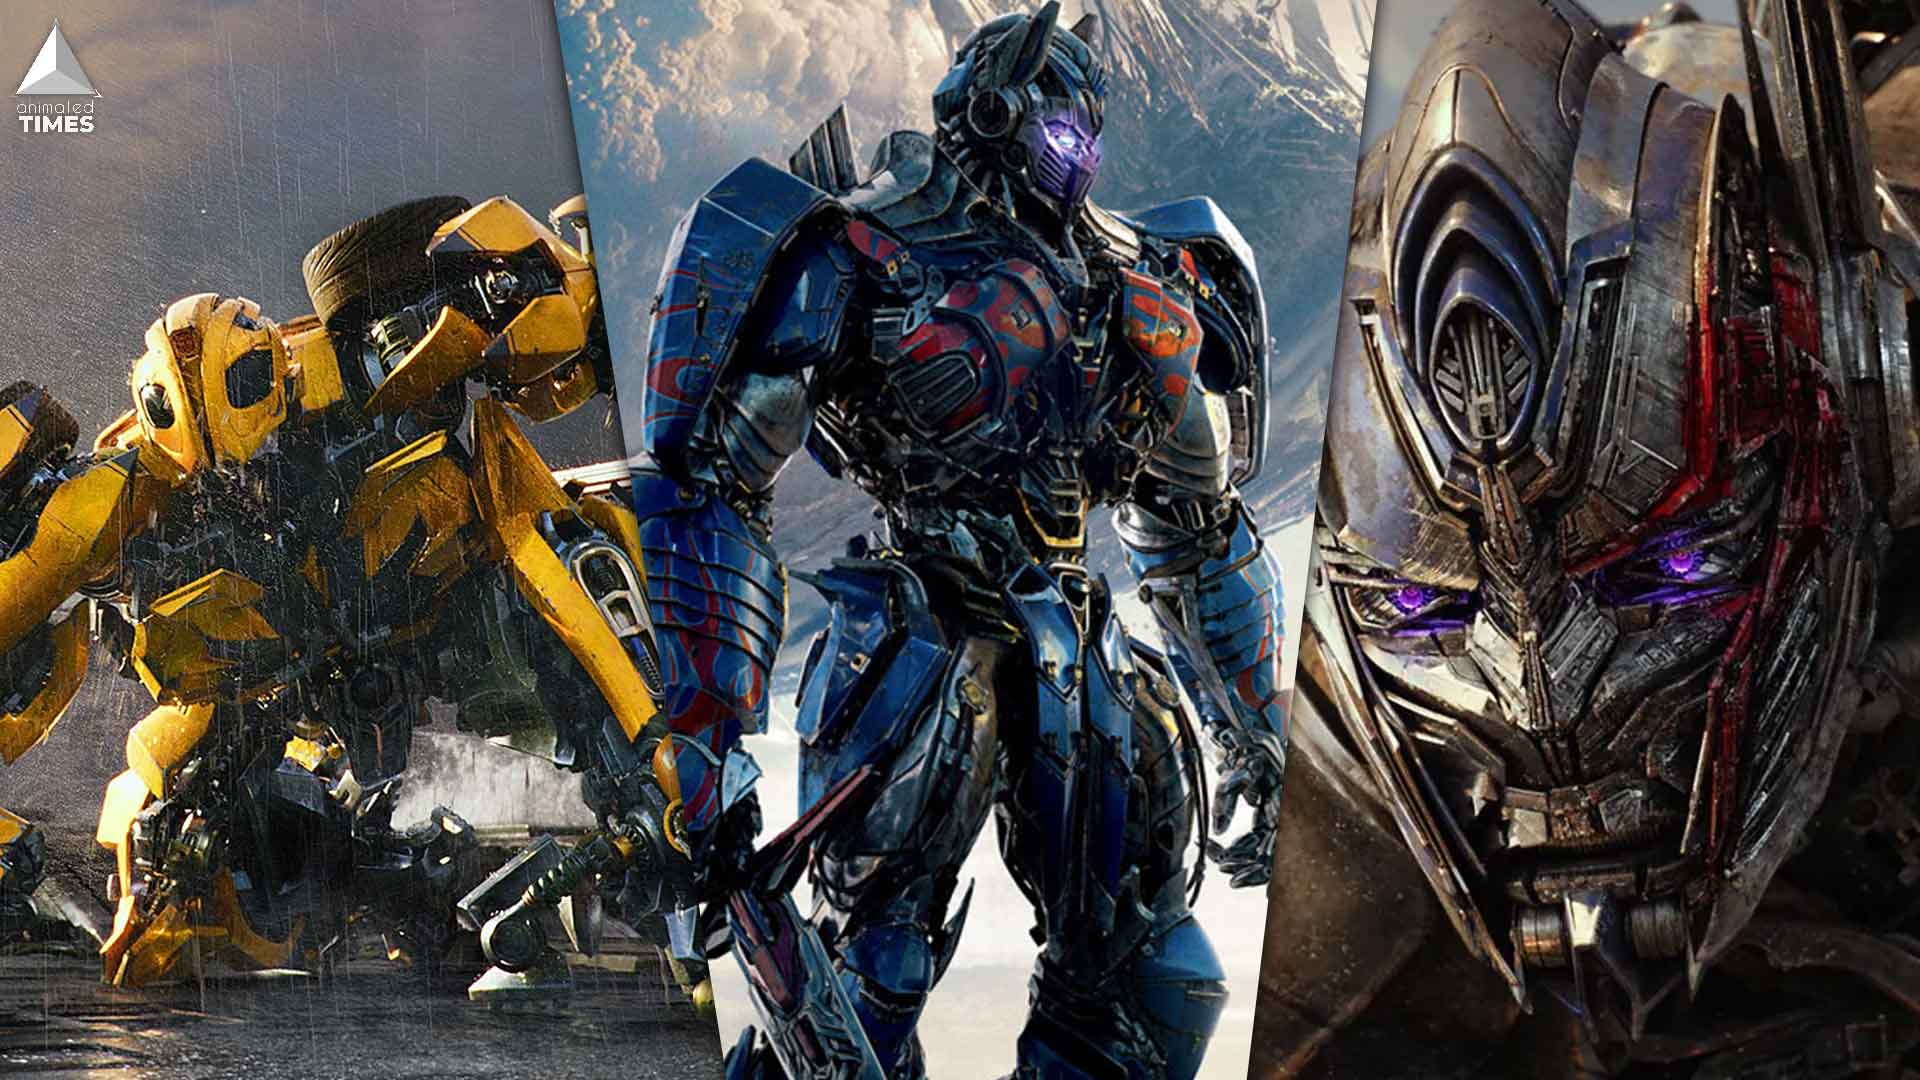 Netflix Transformers Rise Of The Beasts 2022 Movie Wallpapers